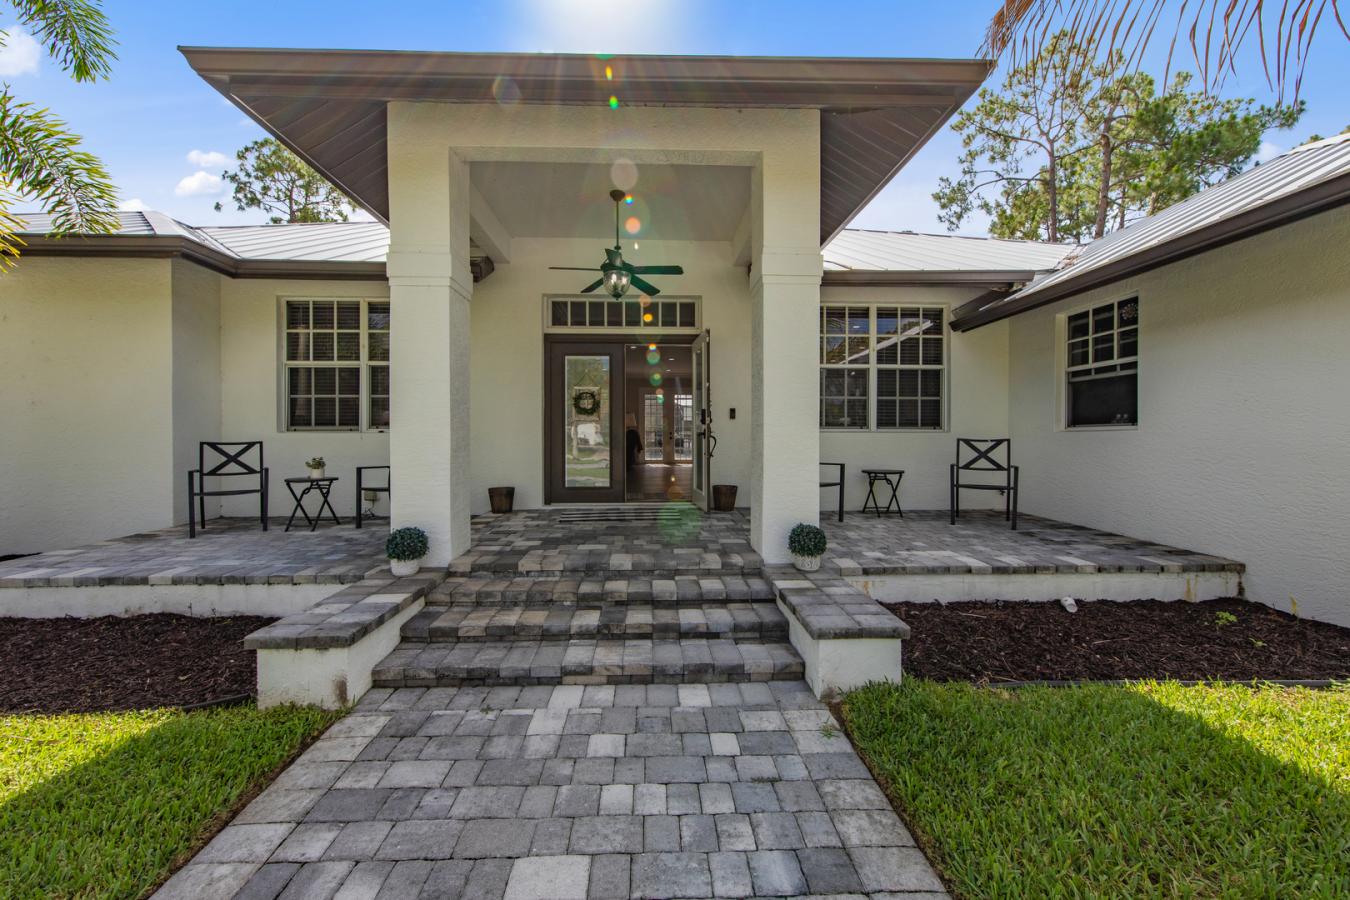 25211 Pinson Drive, Bonita Springs, Florida, 34135, United States, 3 Bedrooms Bedrooms, ,3 BathroomsBathrooms,Residential,For Sale,25211 Pinson Drive,1326885